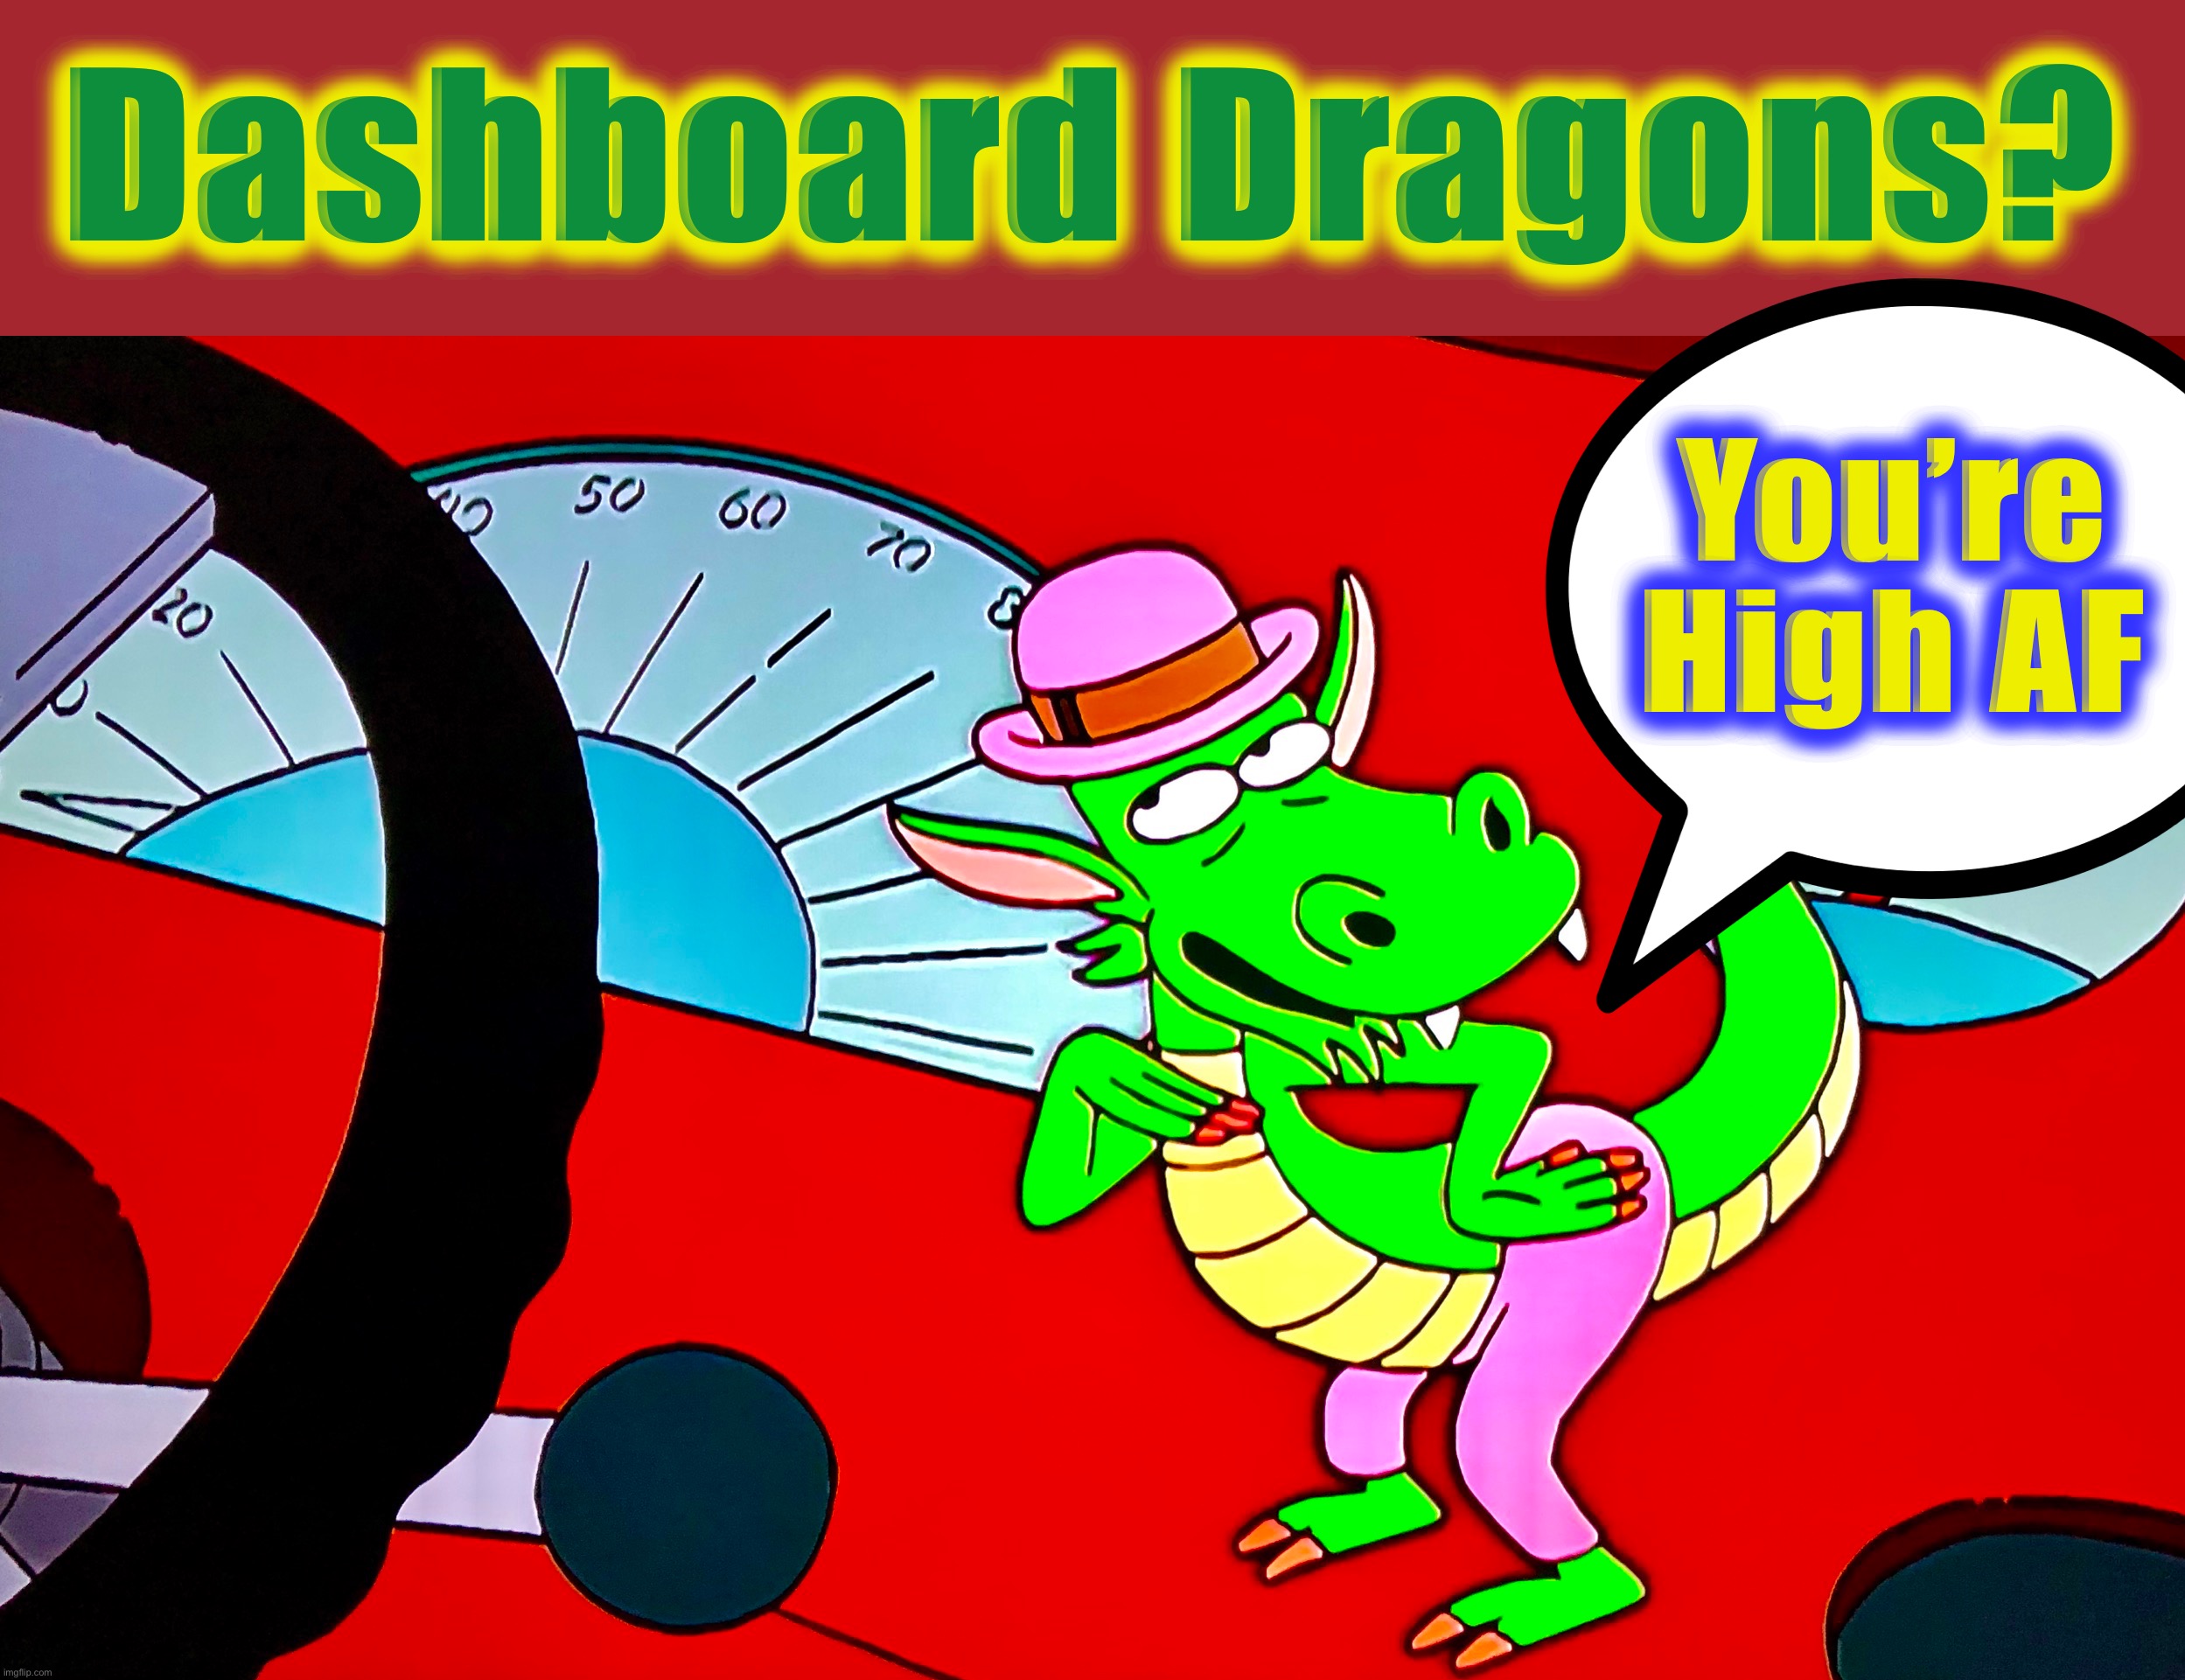 Easy Self-Test | Dashboard Dragons? You’re
High AF | image tagged in dragons,memes,high af,hallucinate,bad idea,don't drink and drive | made w/ Imgflip meme maker